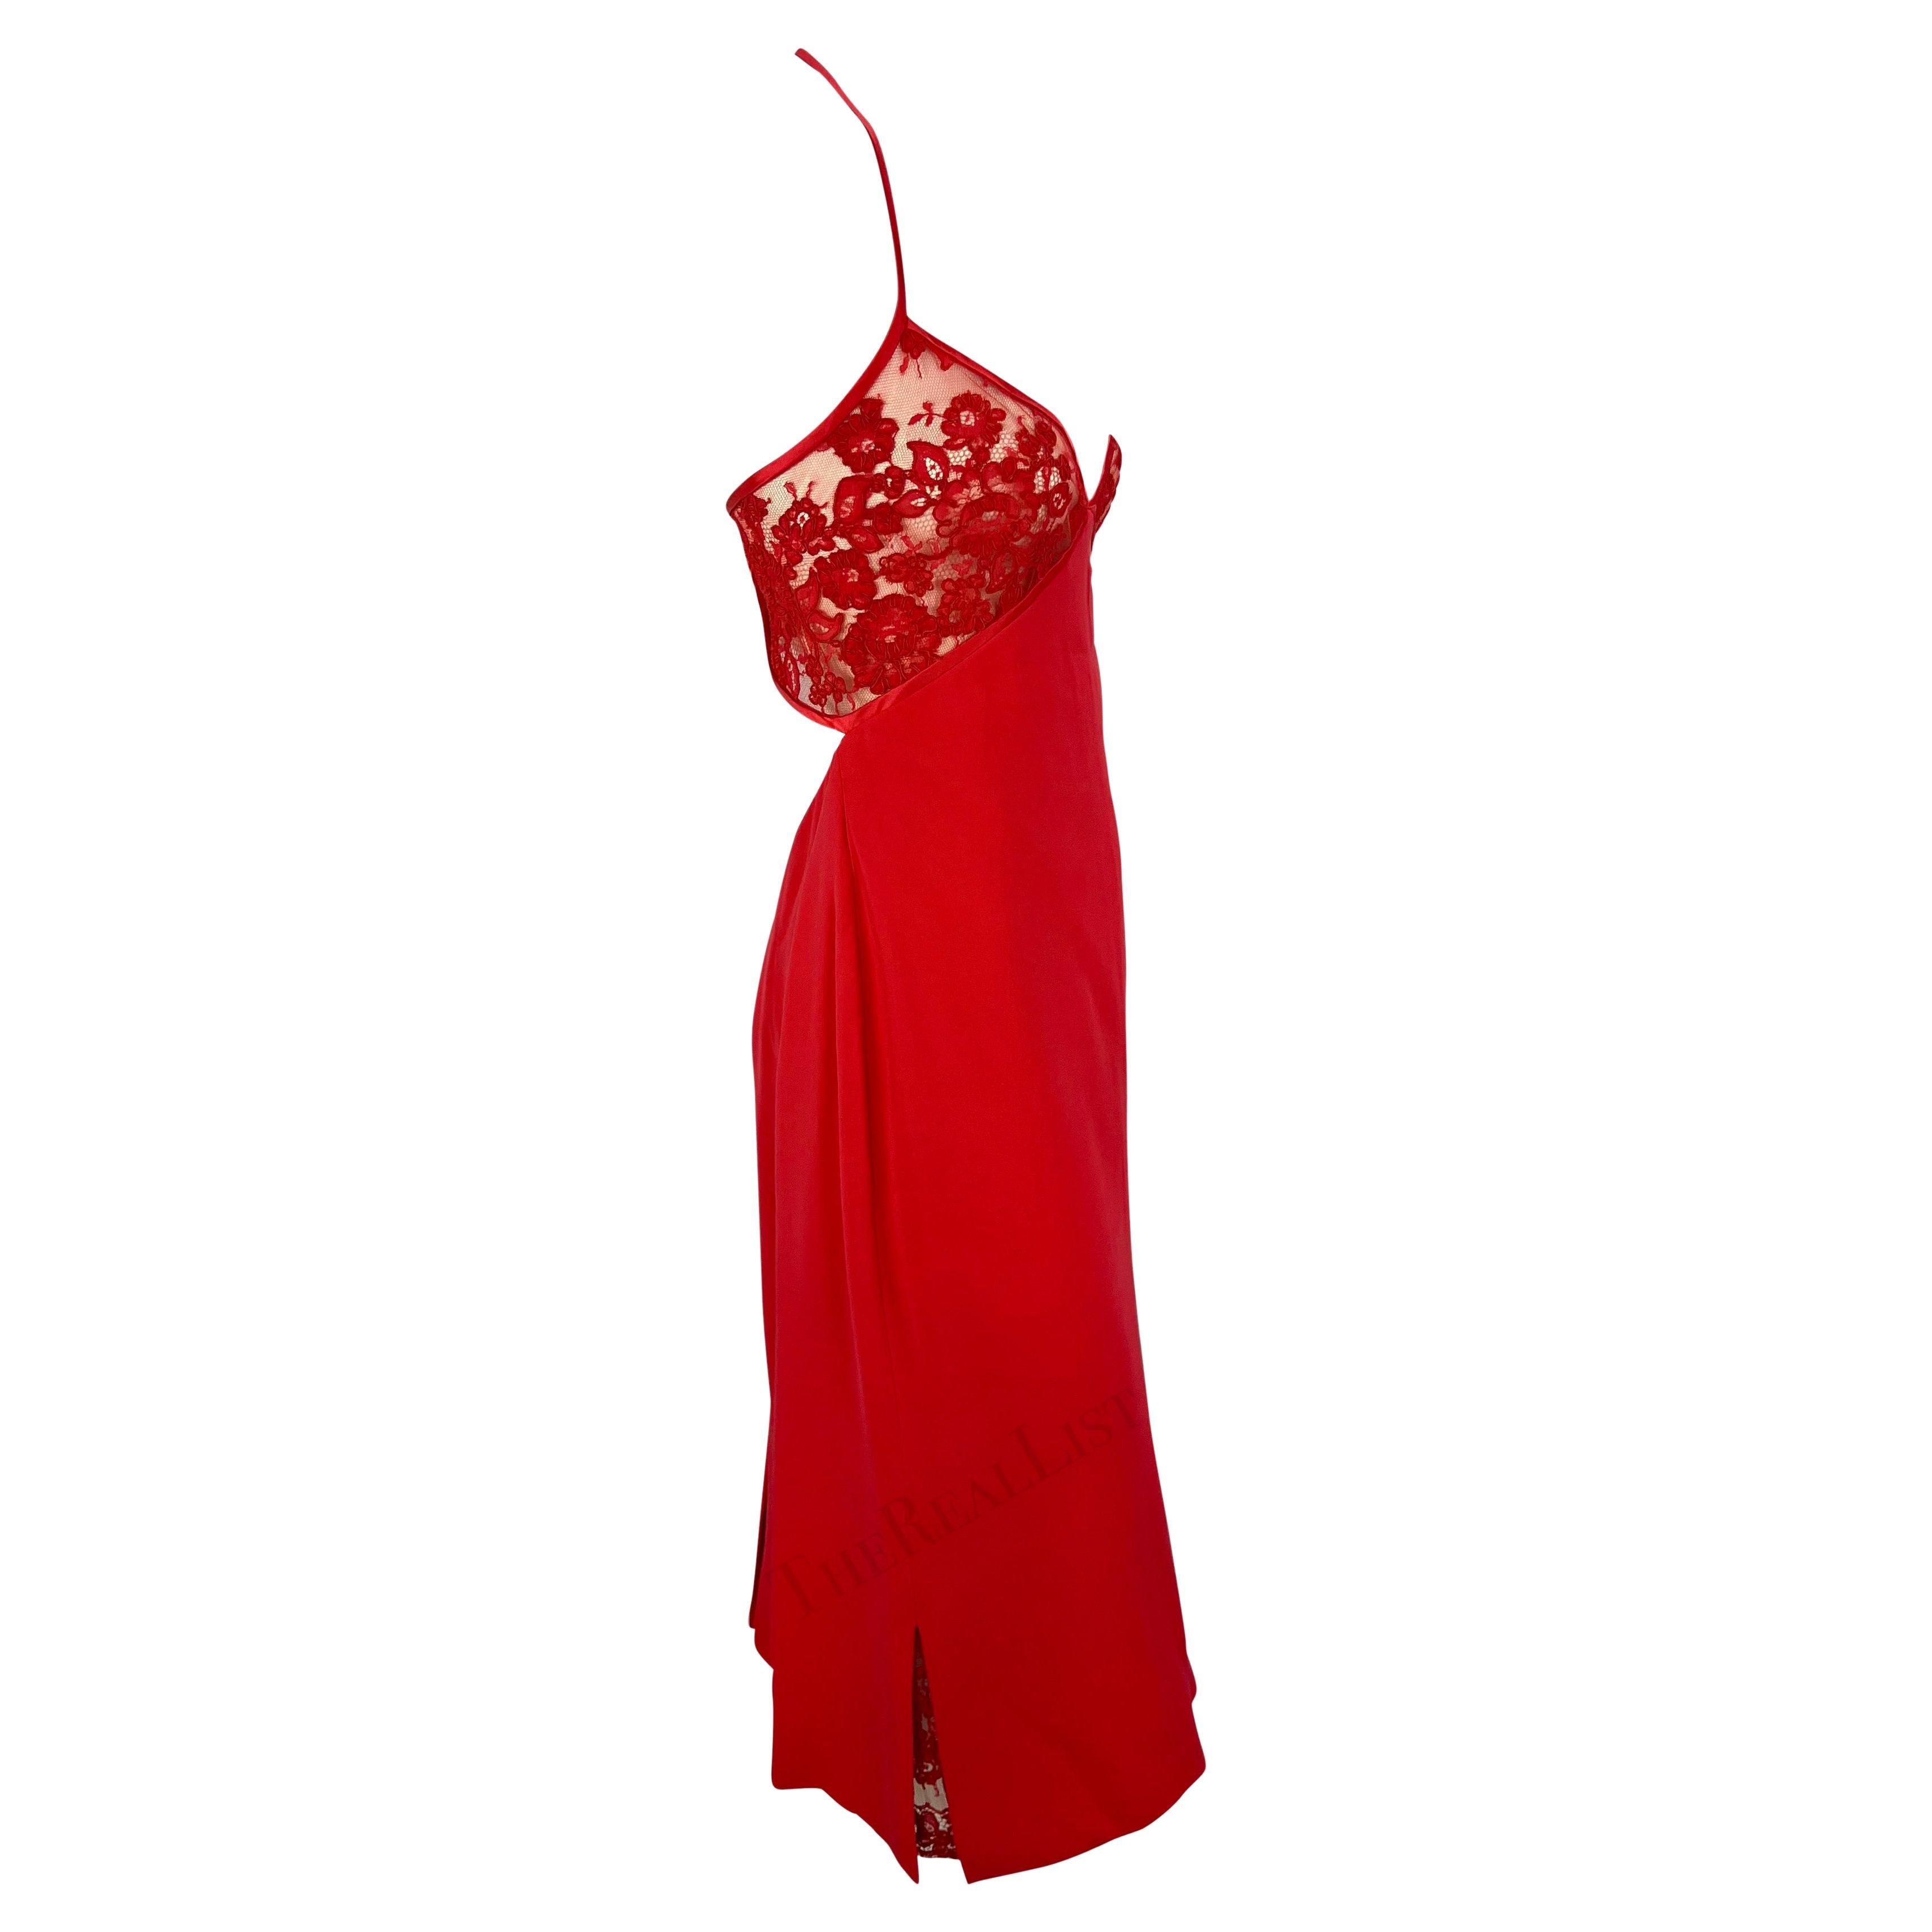 NWT F/W 2004 Valentino Garavani Red Sheer Lace Mini Dress In Excellent Condition For Sale In West Hollywood, CA